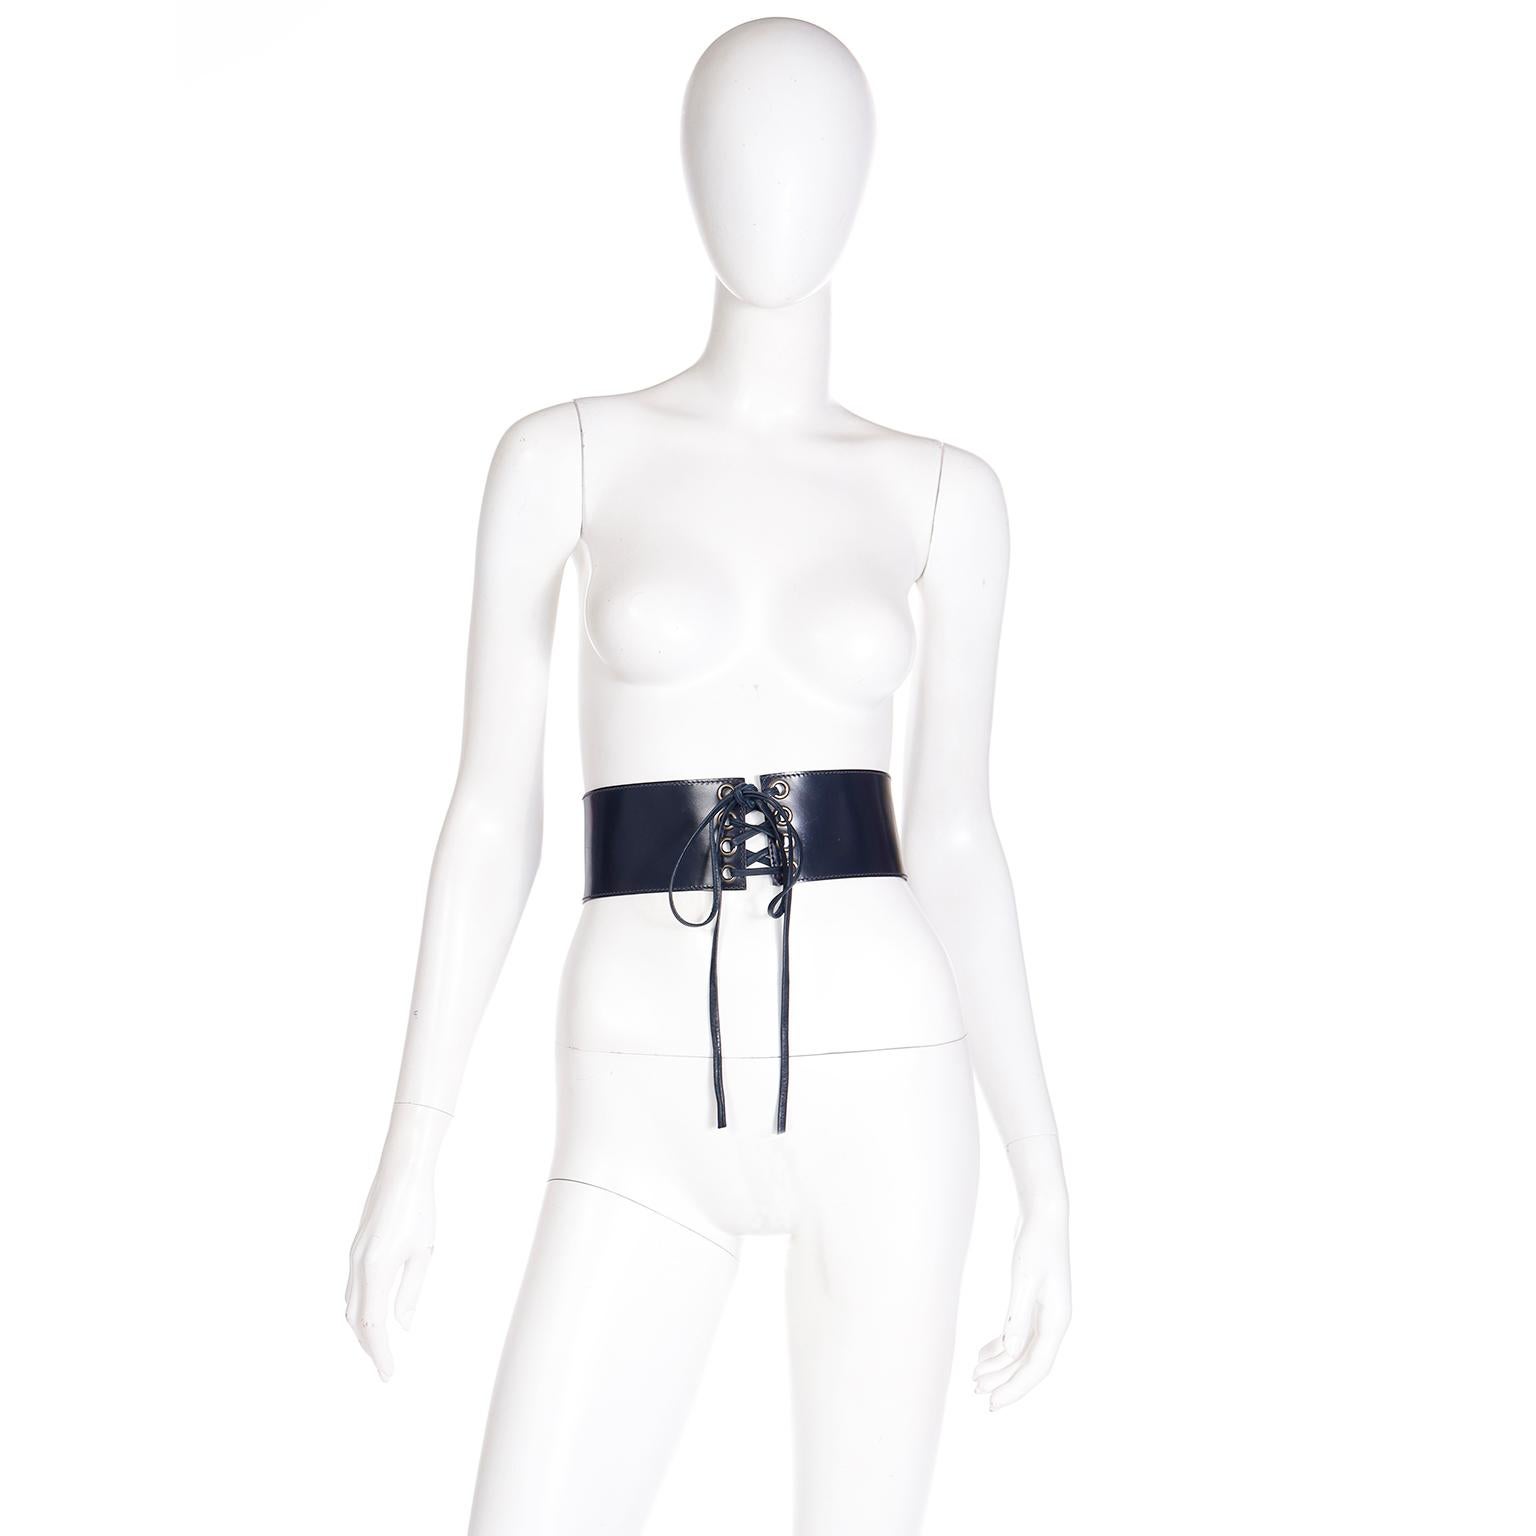 This vintage Yves Saint Laurent belt is a style he re-invented in several of his collections and it is instantly recognizable as a YSL piece. YSL first introduced this style of belt with his iconic Ballet de Russes or Russian Collection in 1976.